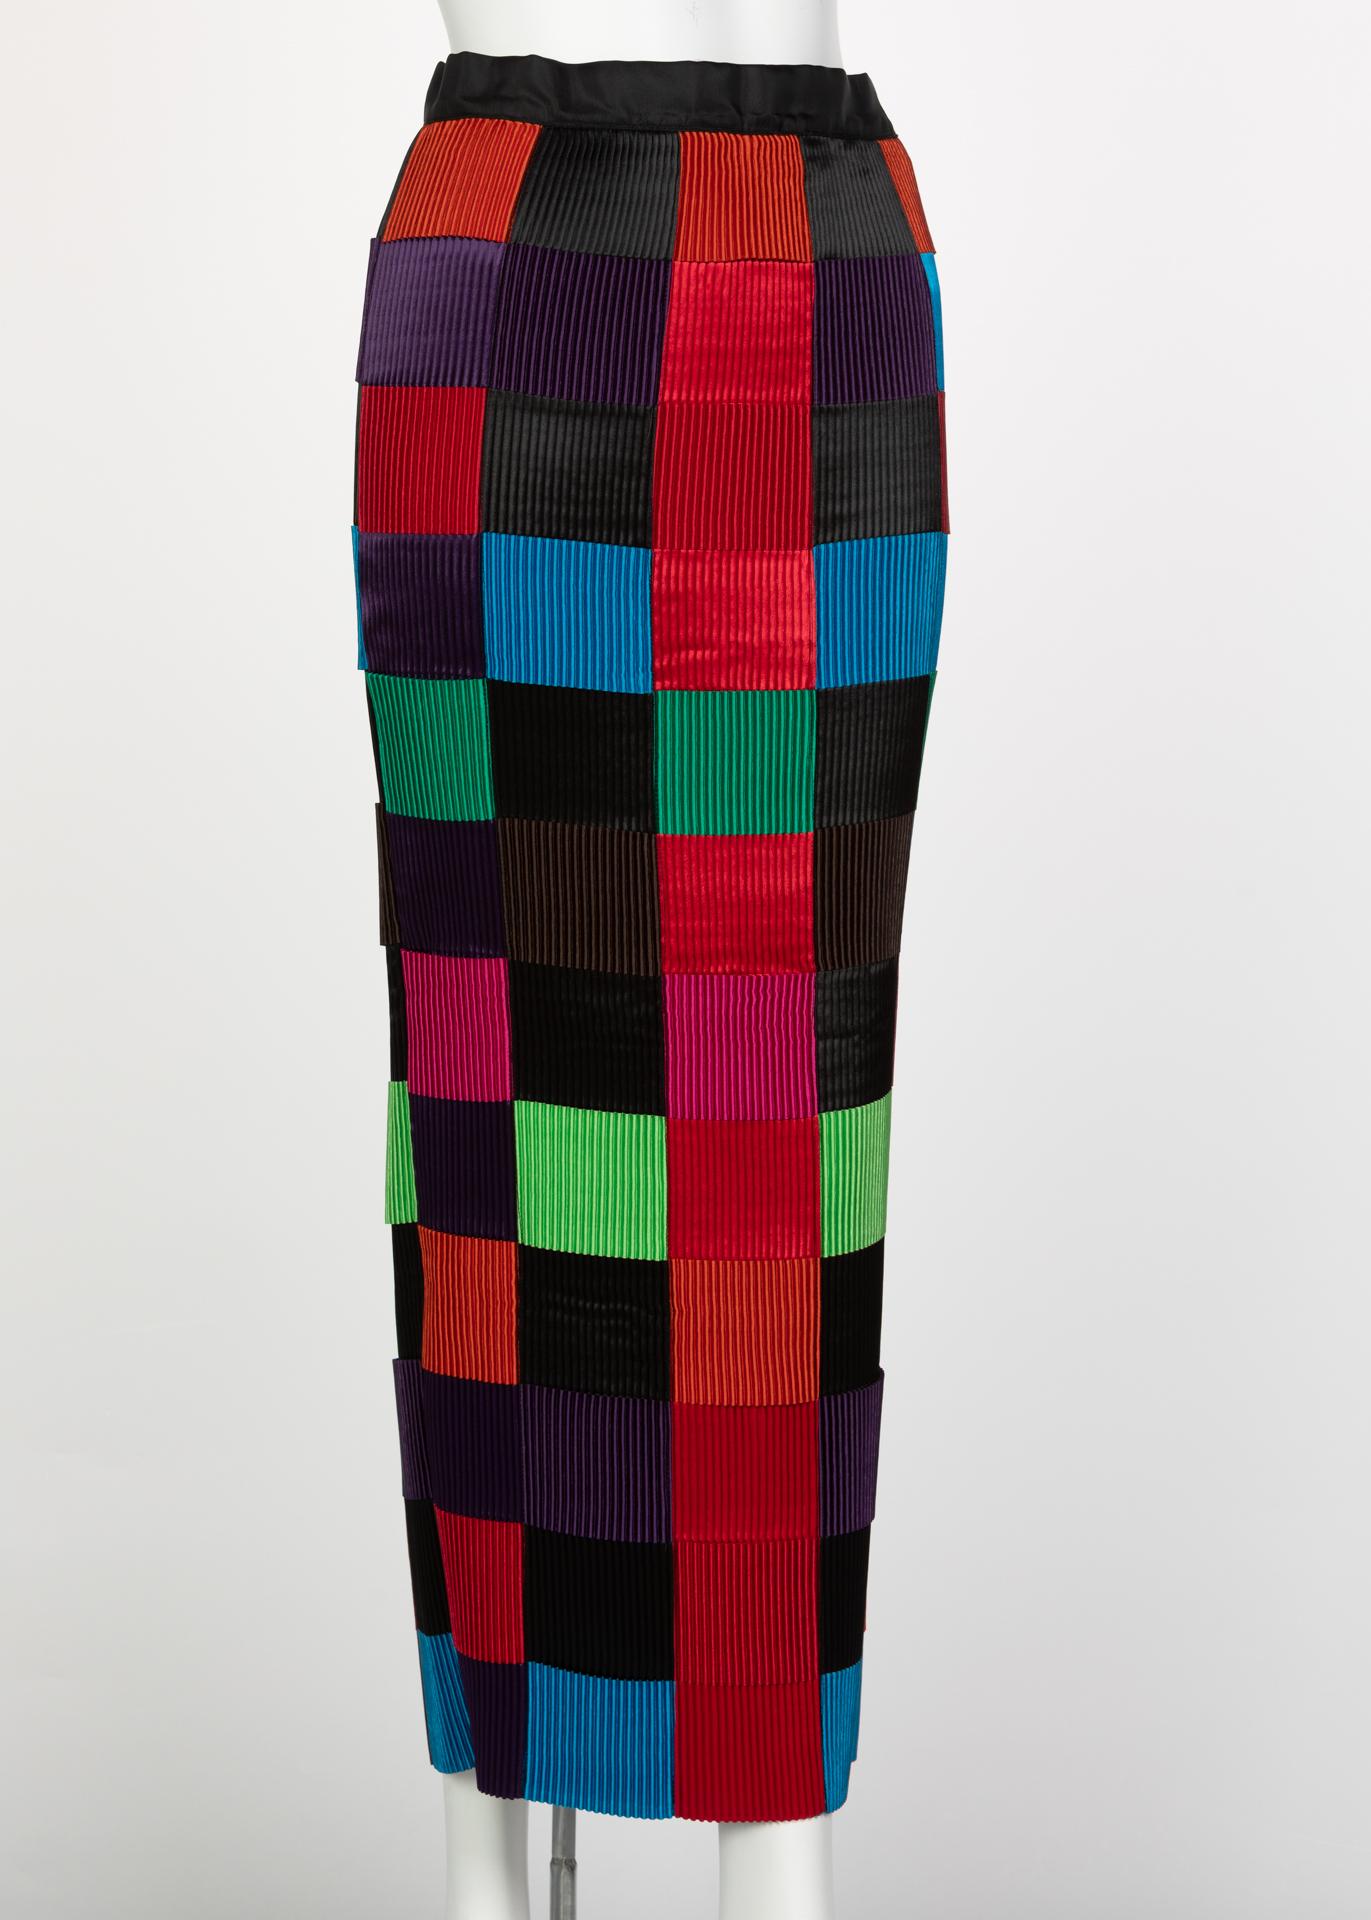 Issey Miyake has a unique architectural aesthetic mixing concepts that typically would be avoided by most designers. Fine, micro-pleating, one of his favorites, is incorporated into nearly all of his designs. This skirt is fascinating as it is made